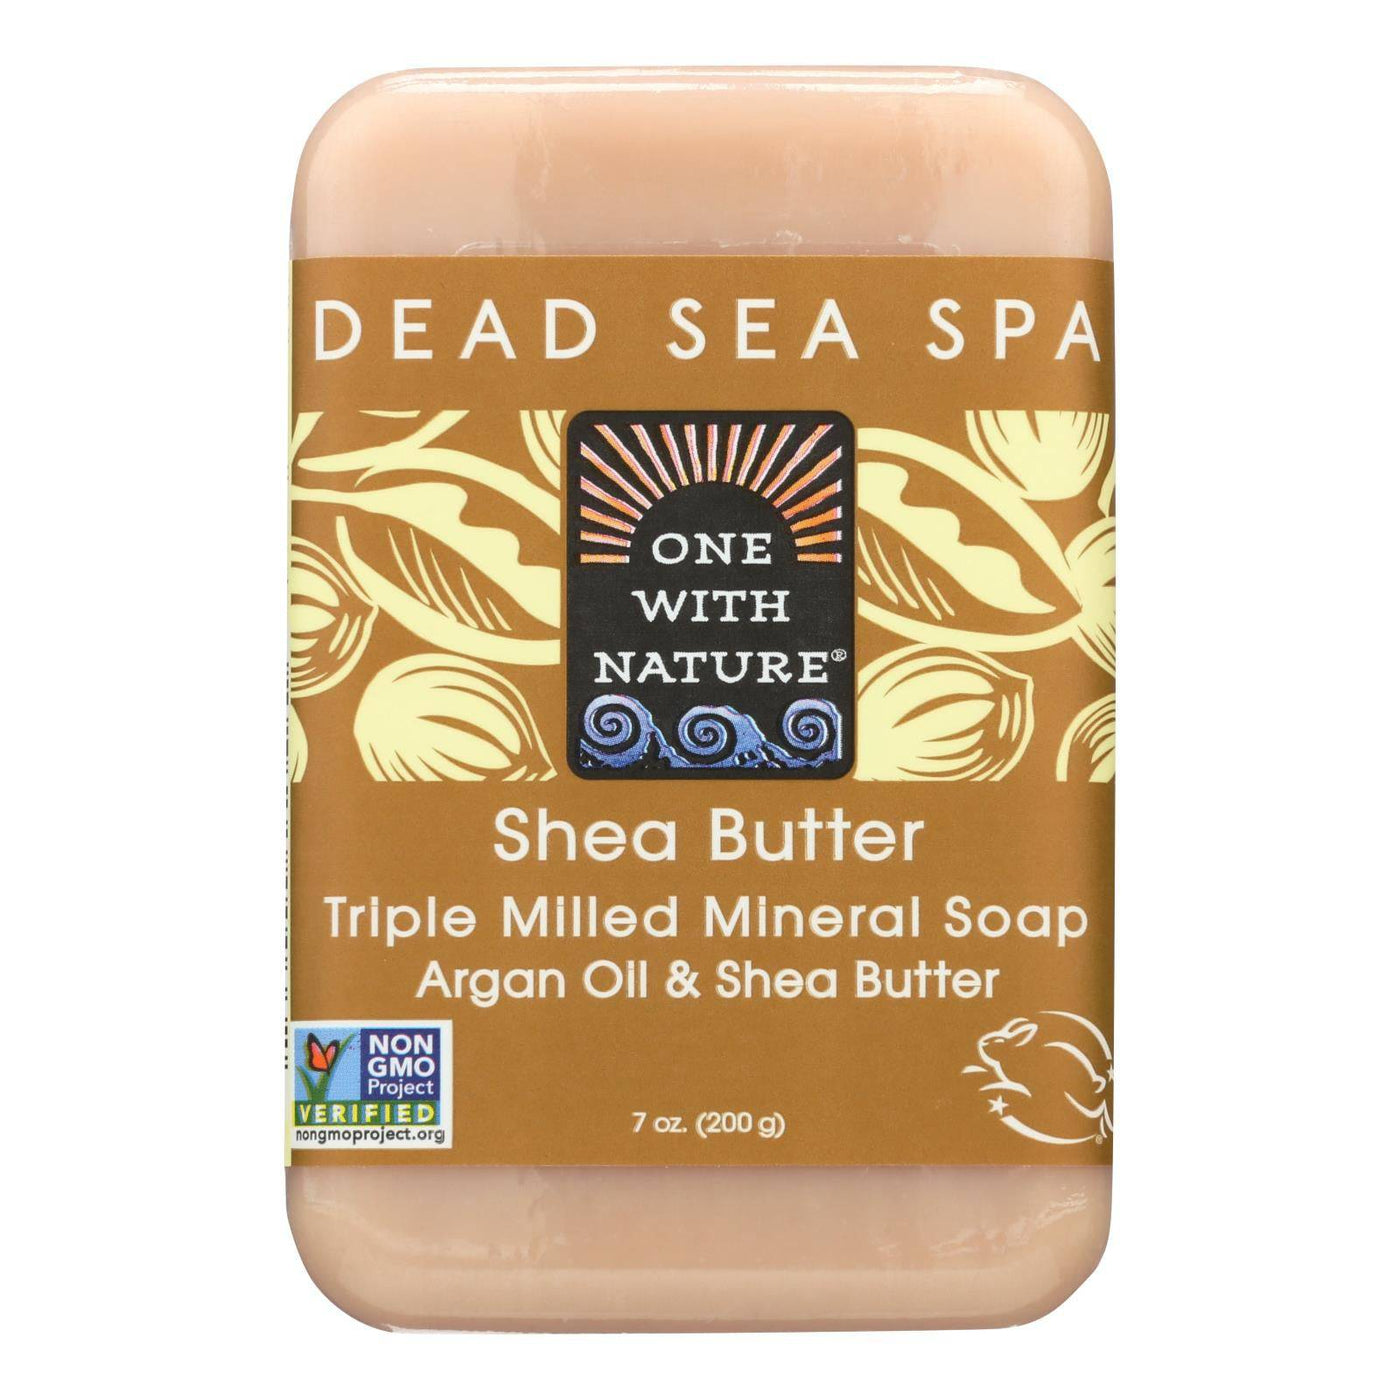 One With Nature Dead Sea Mineral Shea Butter Soap - 7 Oz | OnlyNaturals.us